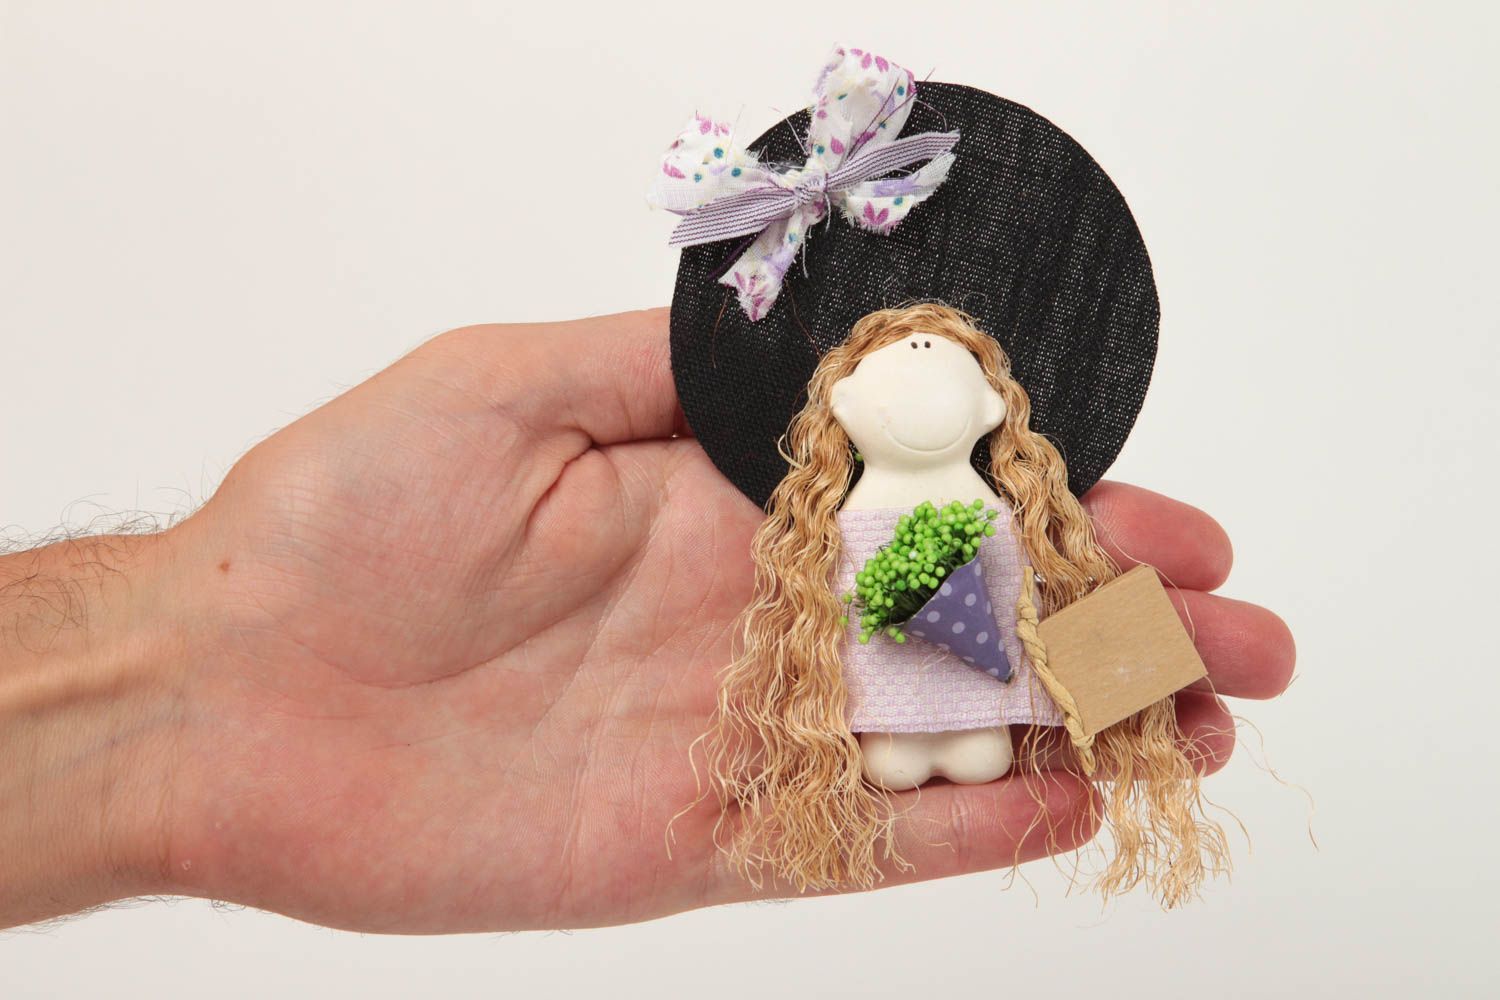 Handmade decorative toy rag doll home decoration gift ideas decorative use only photo 5